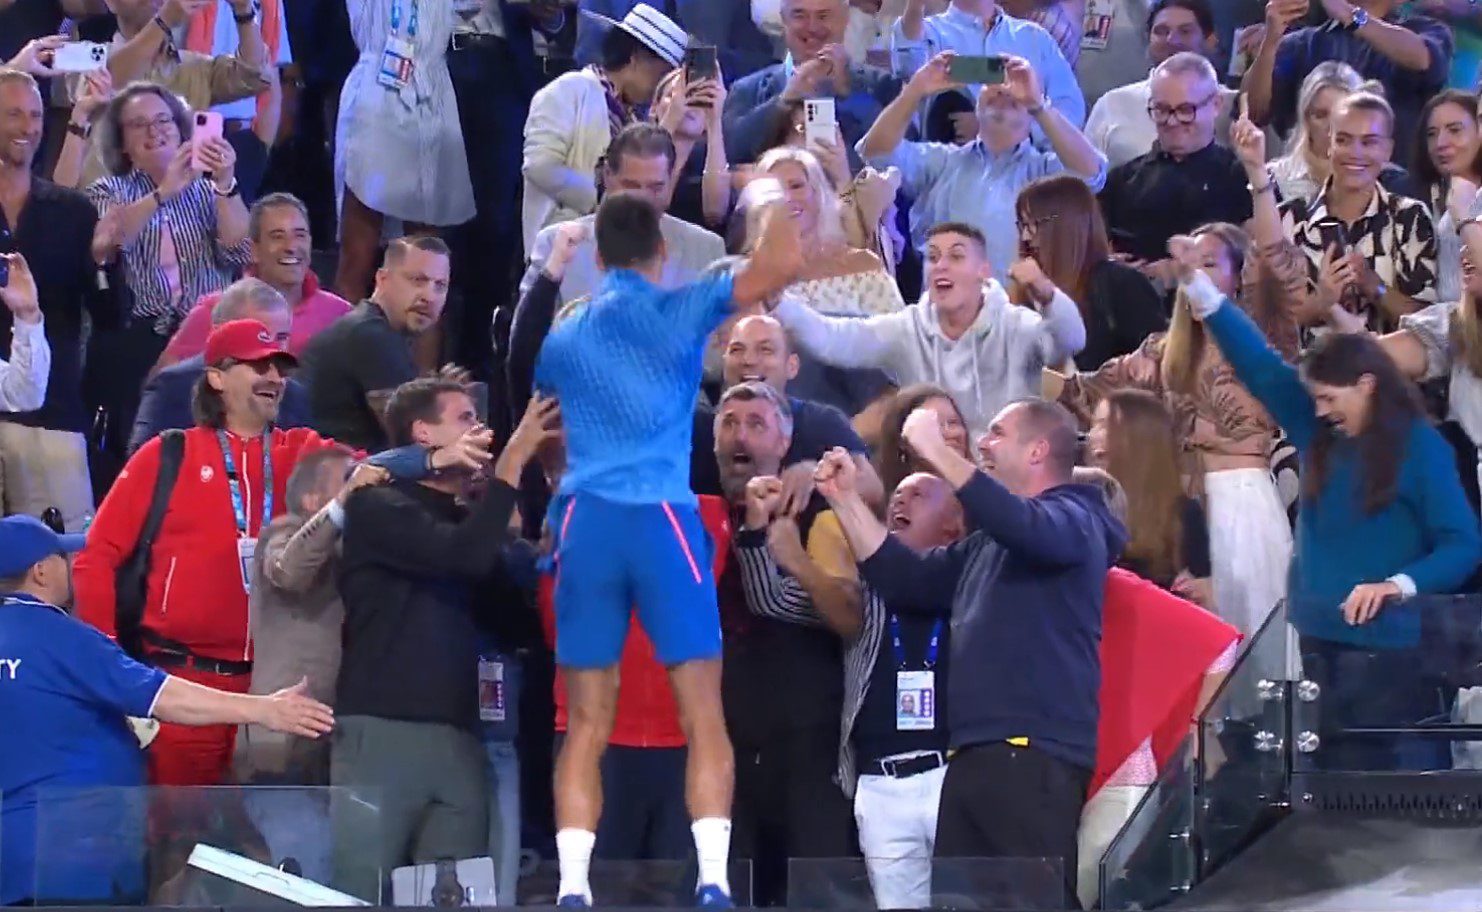 EPIC! Novak Djokovic Breaks Down and Cries After Winning 10th Australian Open – A Year After Being Banned from Australia for Refusing Big Pharma’s Vax (VIDEO)